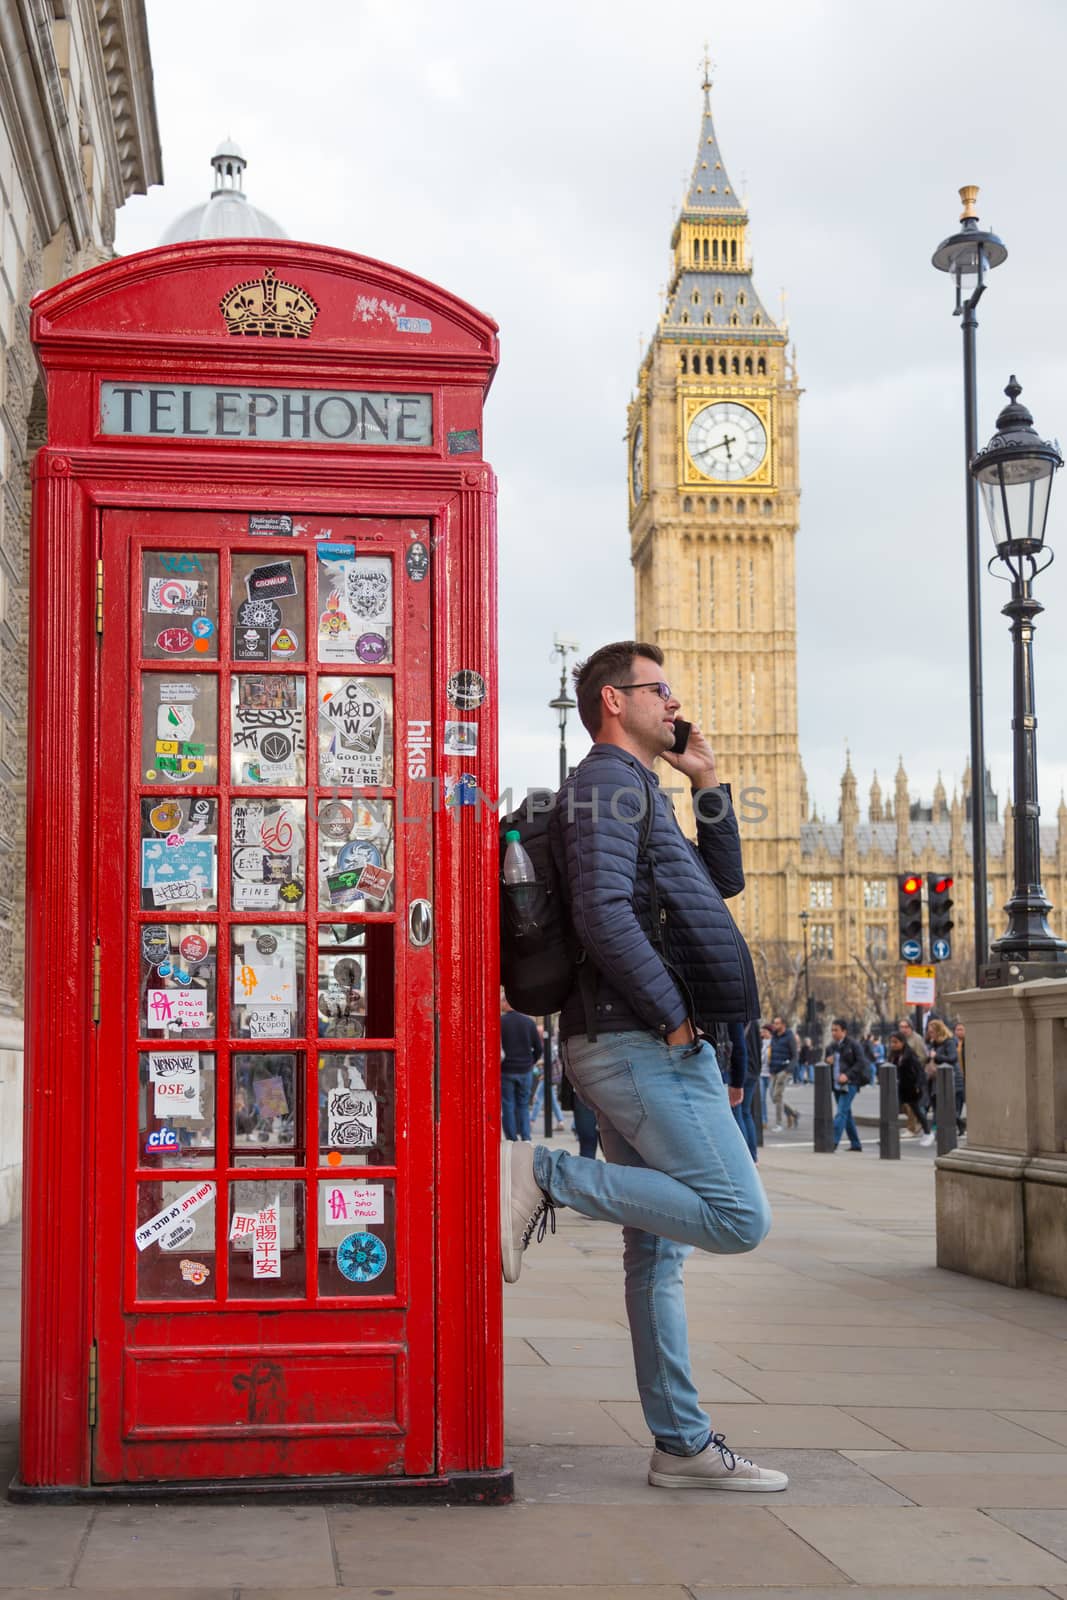 Casual man talking on mobile phone in London, leaning on traditional british red telephone booth. Big Ben can be seen in background. London, England.